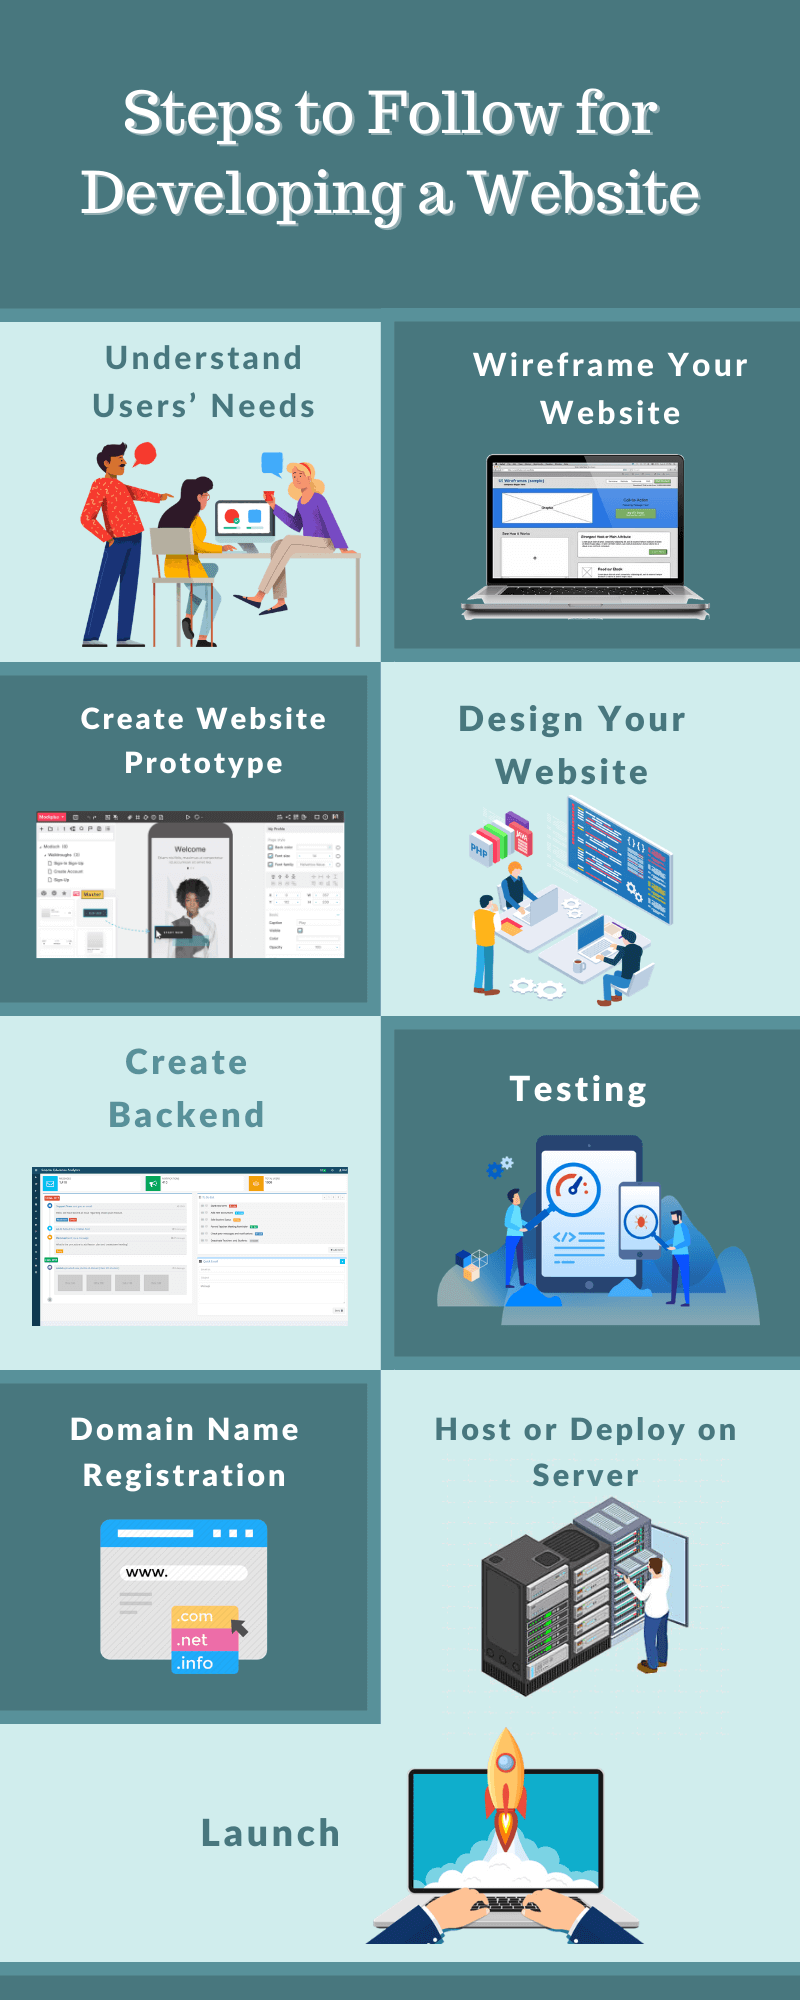 A Step-by-Step Guide to the Website Development Process